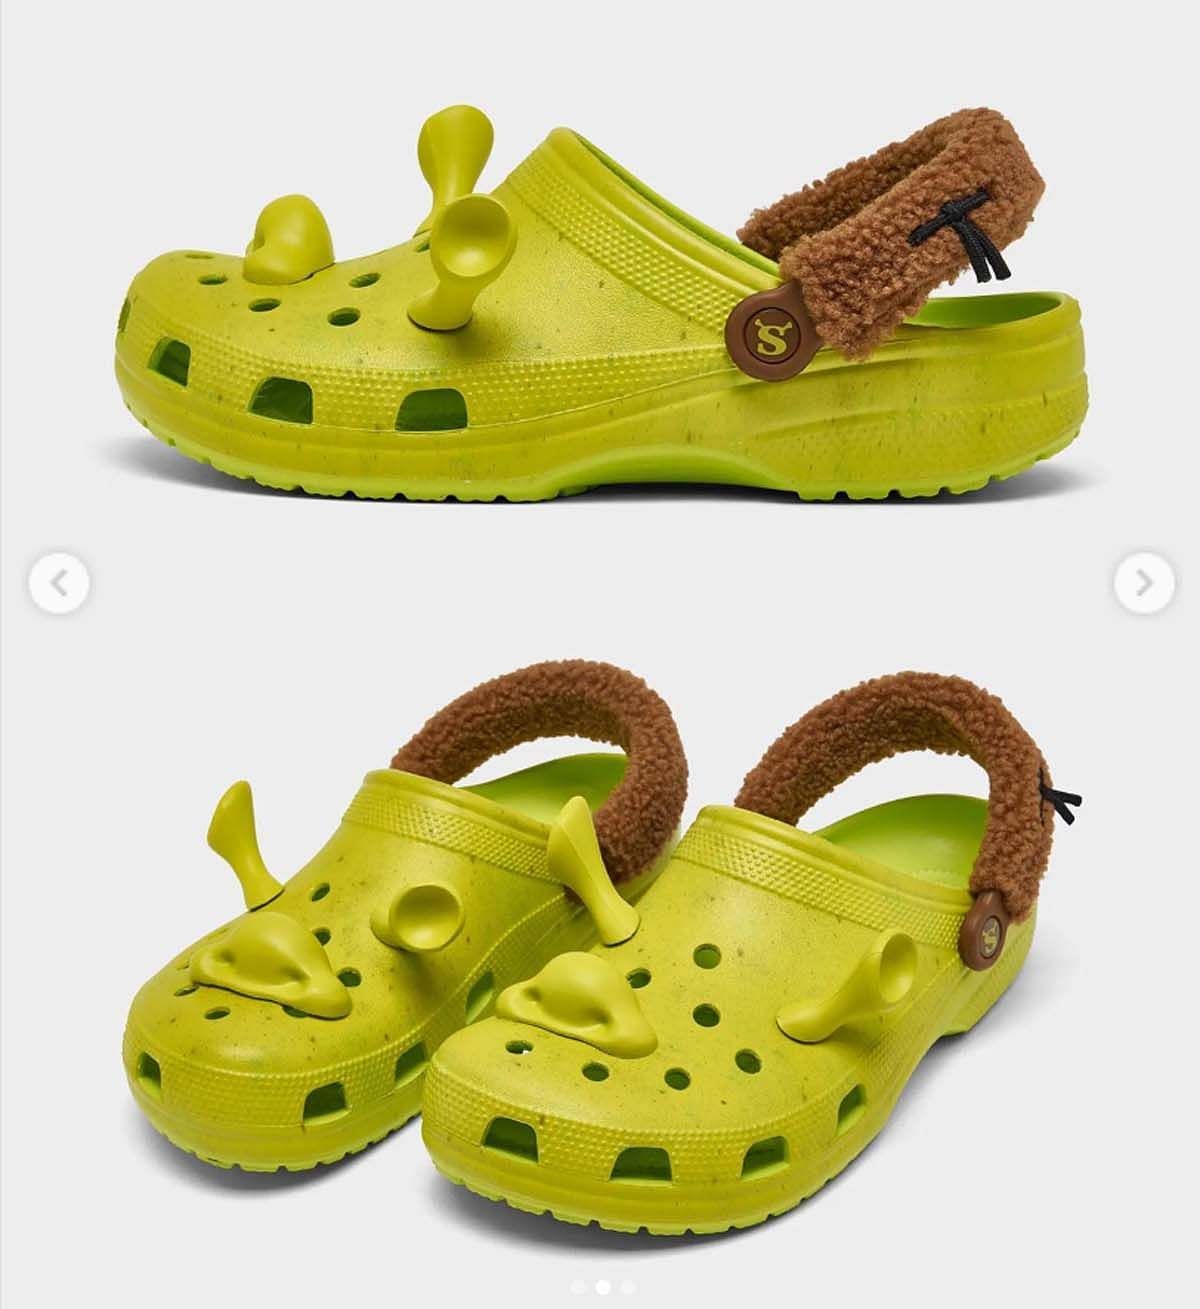 A Shrek & Crocs Collaboration is Reportedly On the Way!